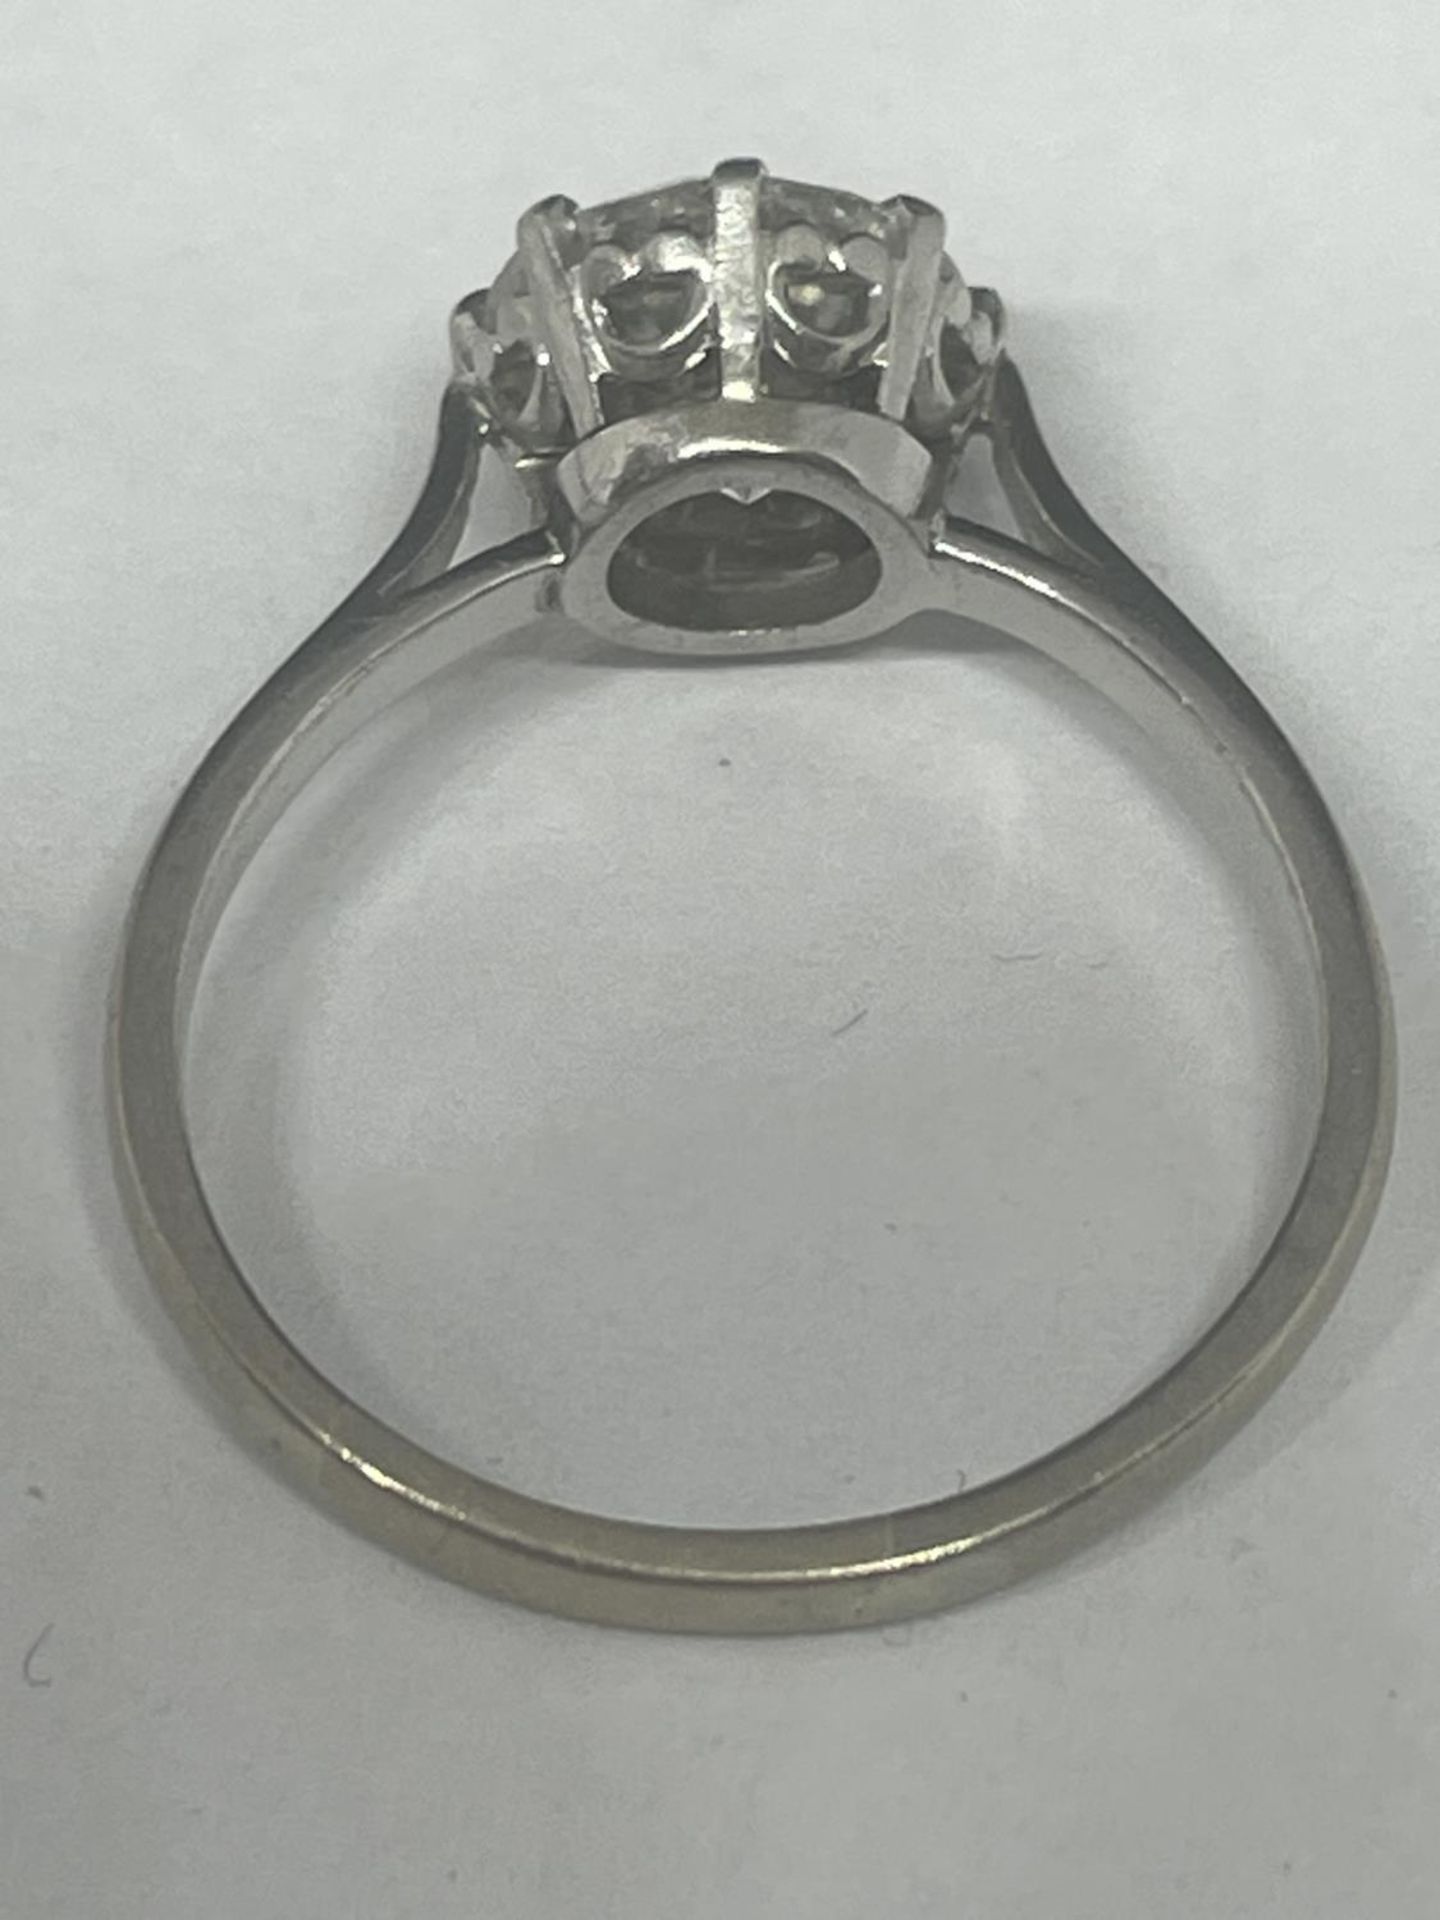 A SINGLE STONE DIAMOND SOLITAIRE RING. APPROXIMATELY 2.5 CARAT MOUNTED ON 18 CARAT WHITE GOLD. - Image 3 of 4